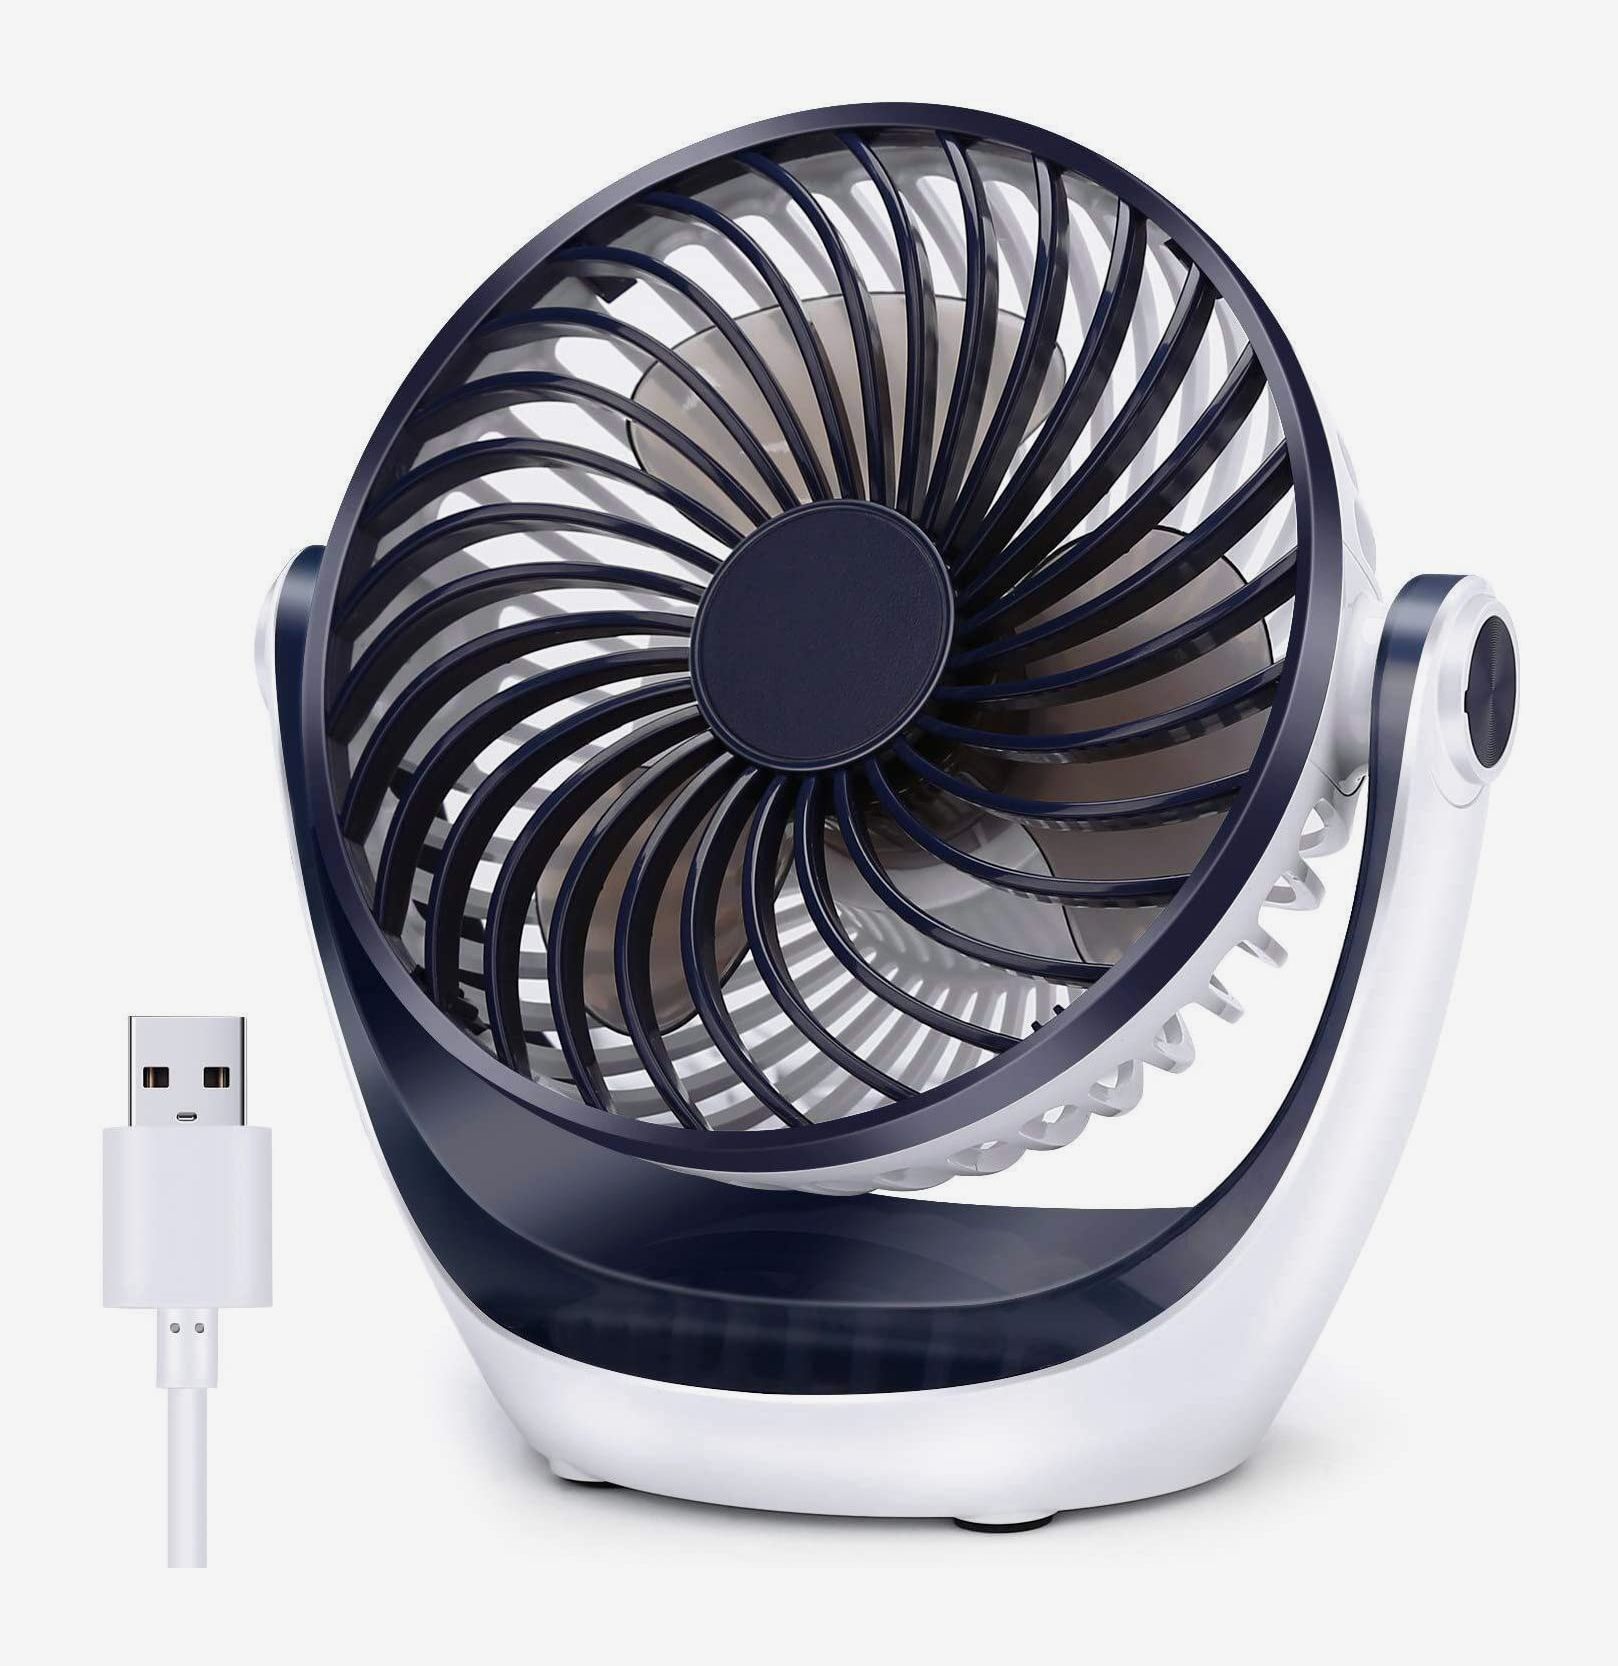 USB Small Fan Personal Quiet Mini Handheld Fan Super Quiet Portable Desk Desktop Table Cooling Fan With USB Rechargeable Electric For Car Office Room Outdoor Household Traveling Convenient Mini